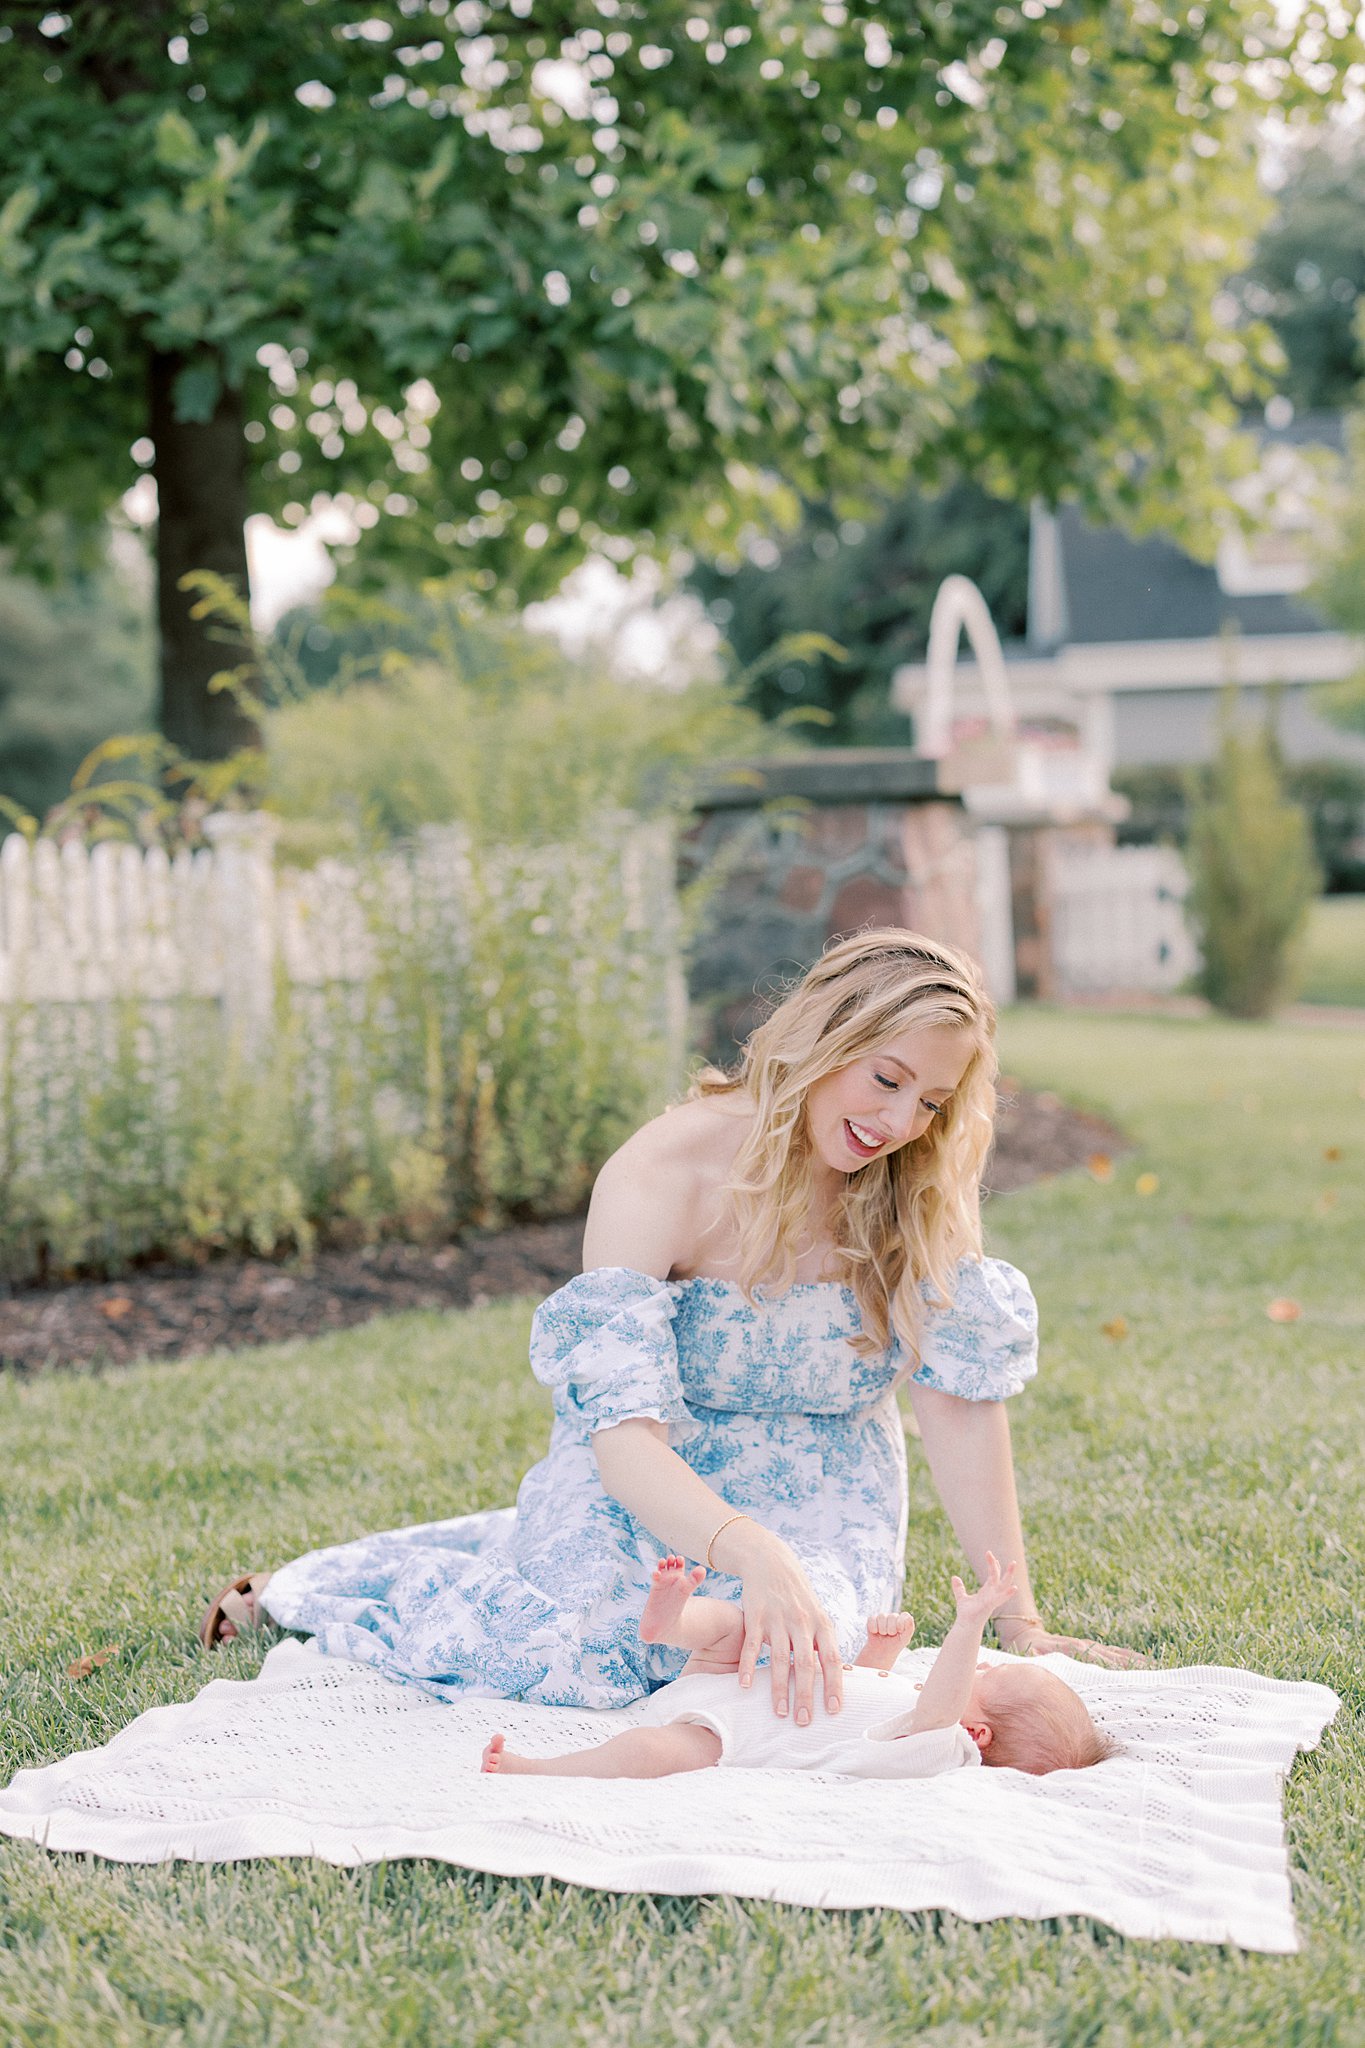 A happy new mom tickles her newborn baby laying on a picnic blanket in a garden